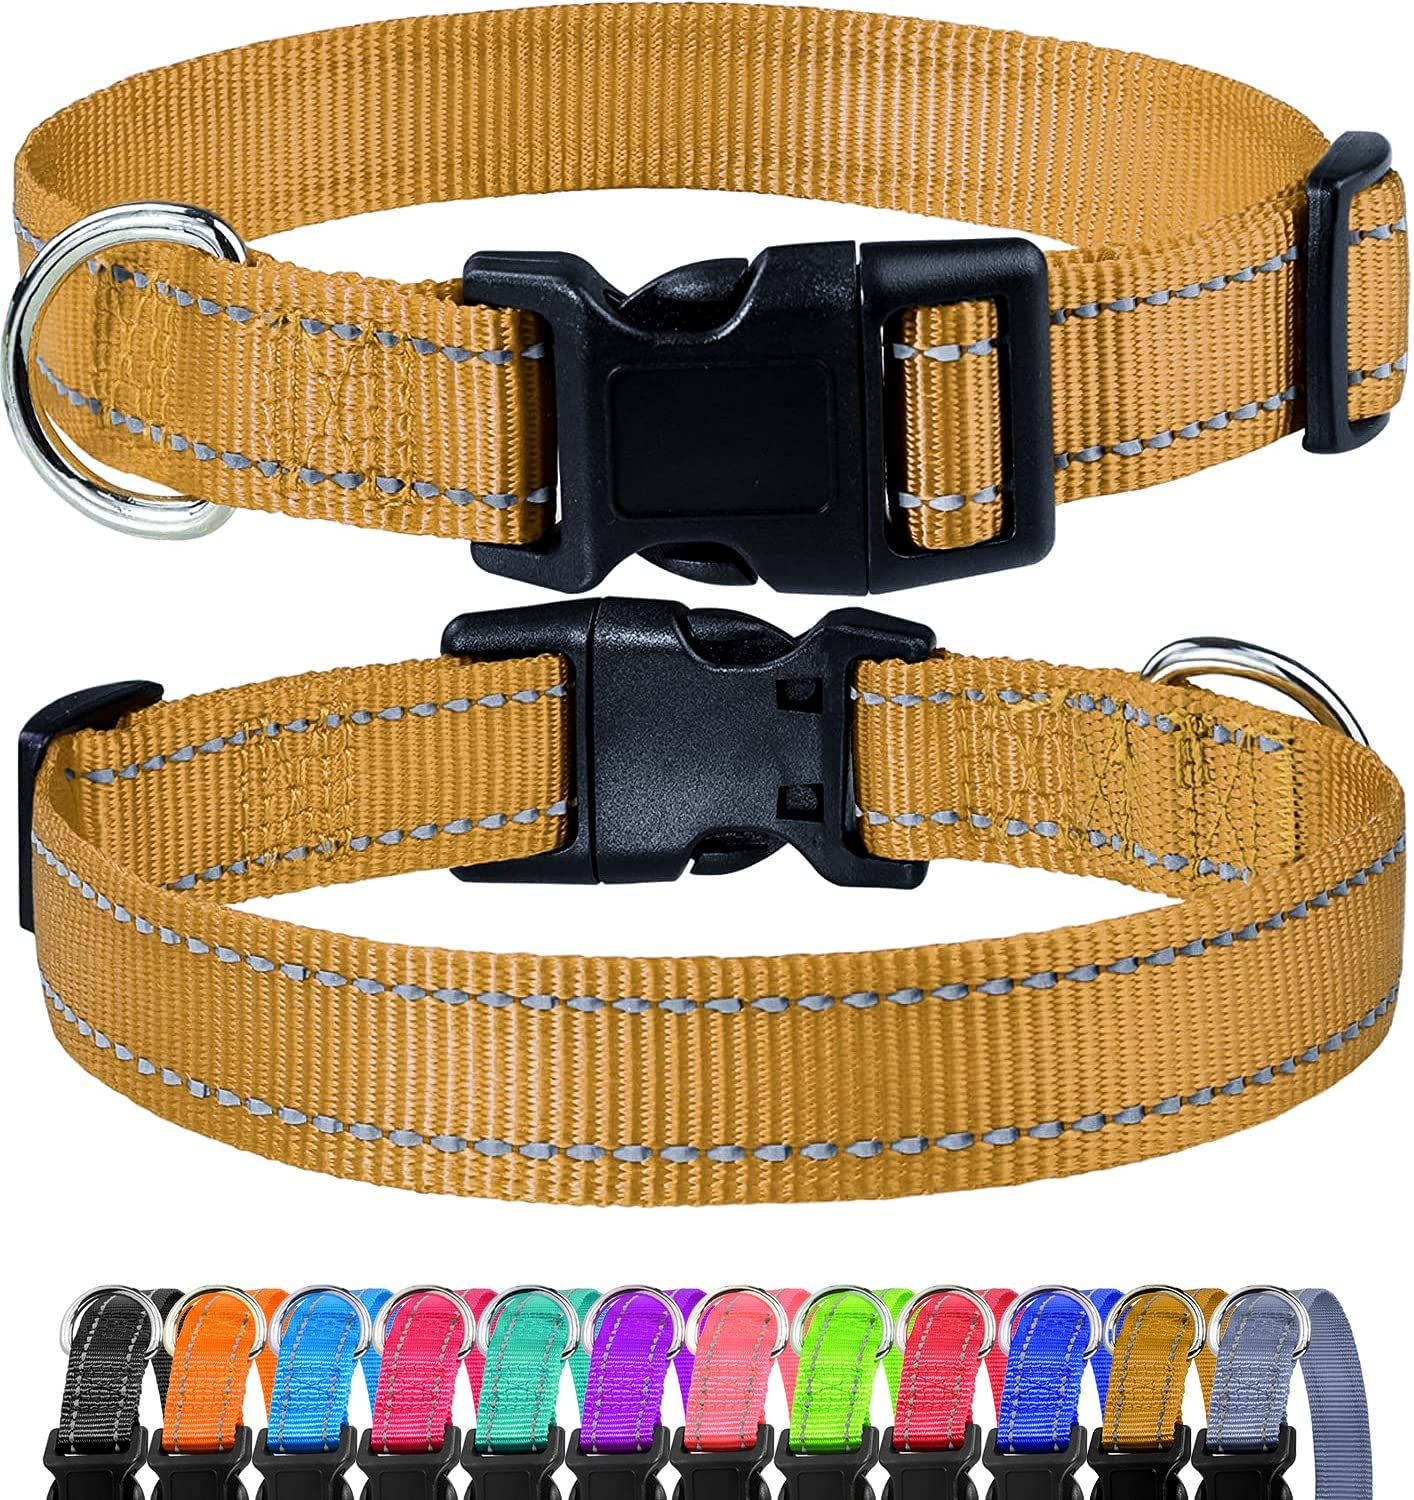 Funtags Reflective Dog Collar, Sturdy Nylon Collars for Small Girl and Boy Dogs, Adjustable Dog Collar with Quick Release Buckle, Purple